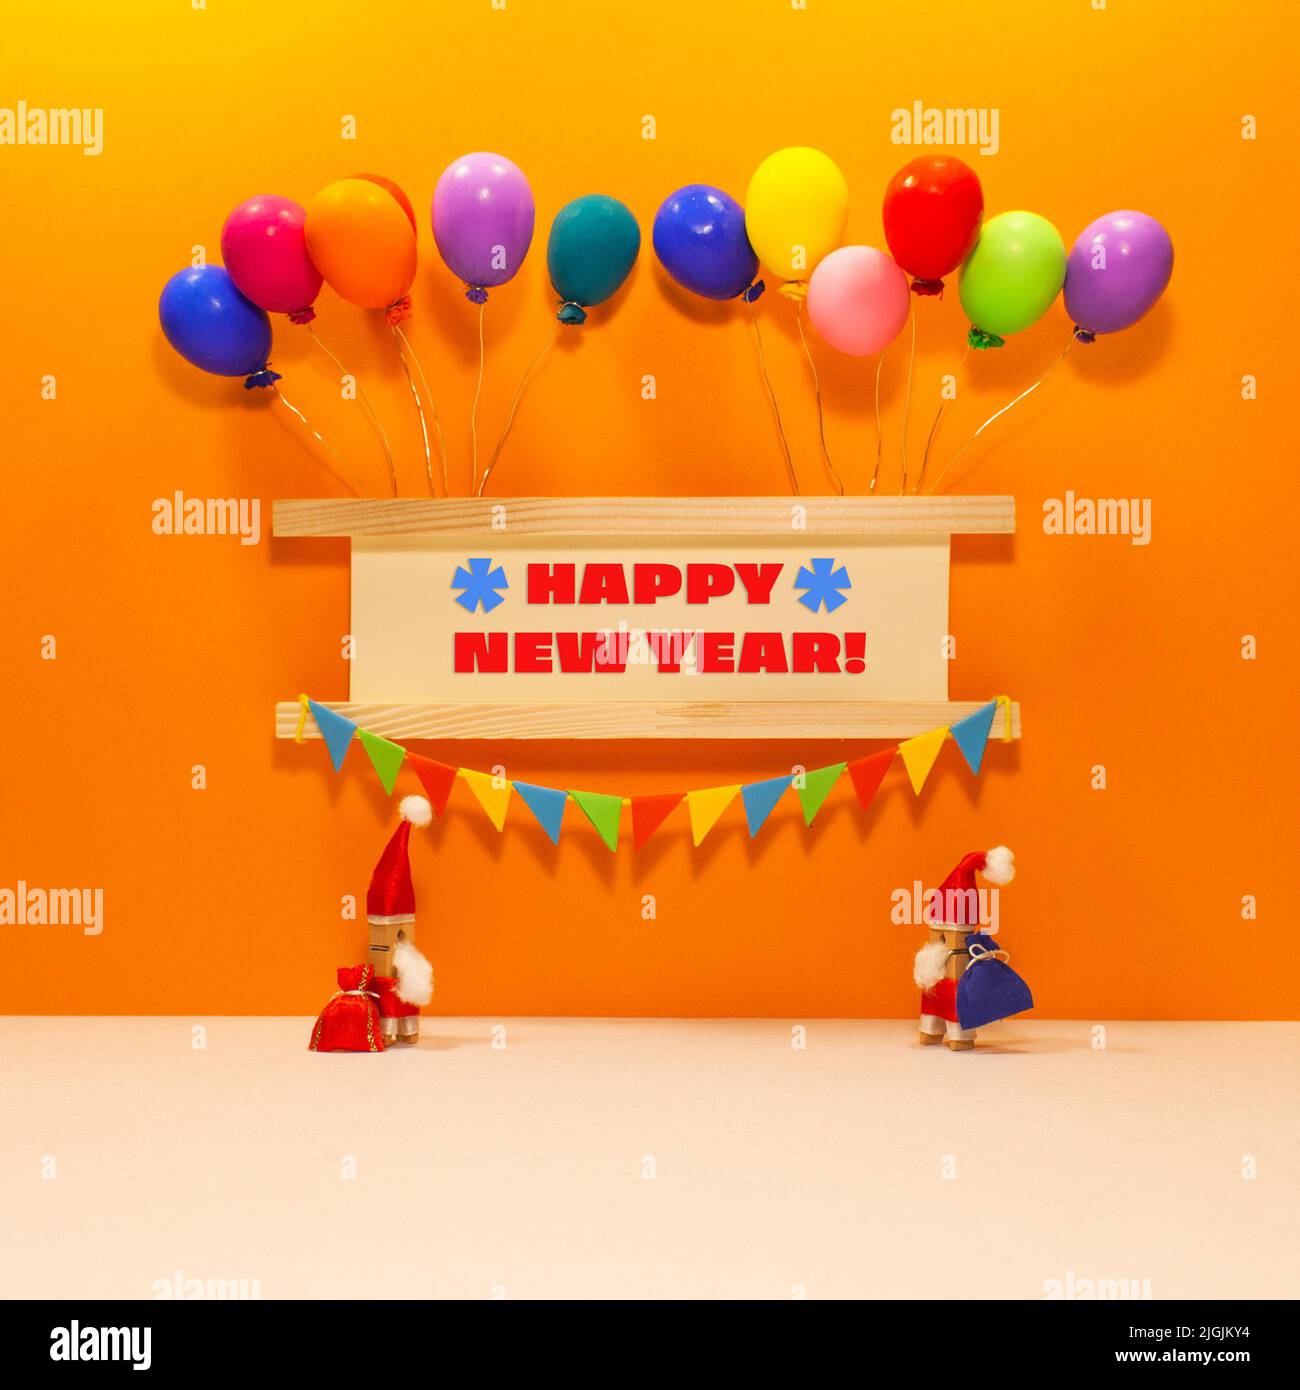 Festive sign decorated balloons, garland of flags. Two clothespin Santa Claus toys with bags of gifts. Message Happy New Year. Stock Photo